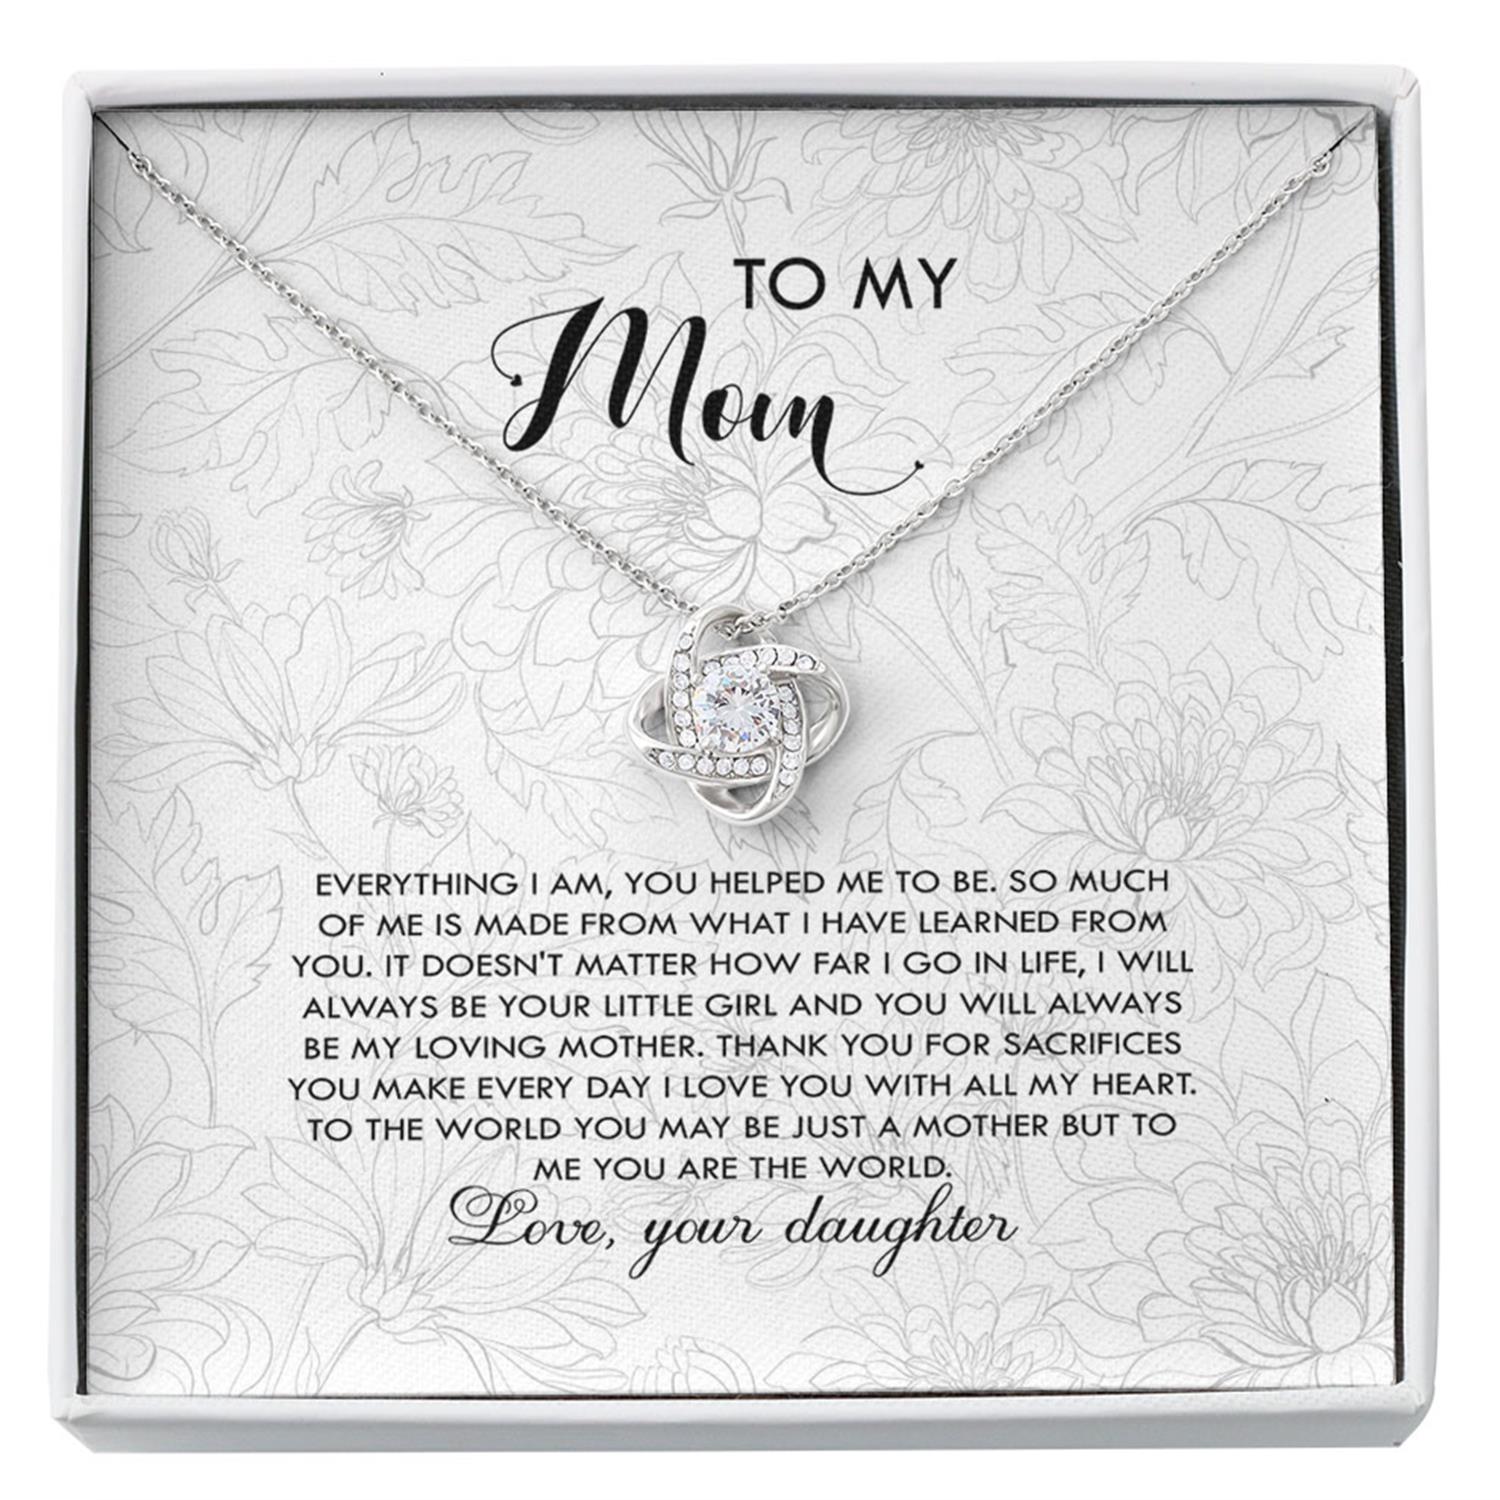 Mom Necklace Gift - You Are The World Necklace, Mother Daughter Custom Necklace